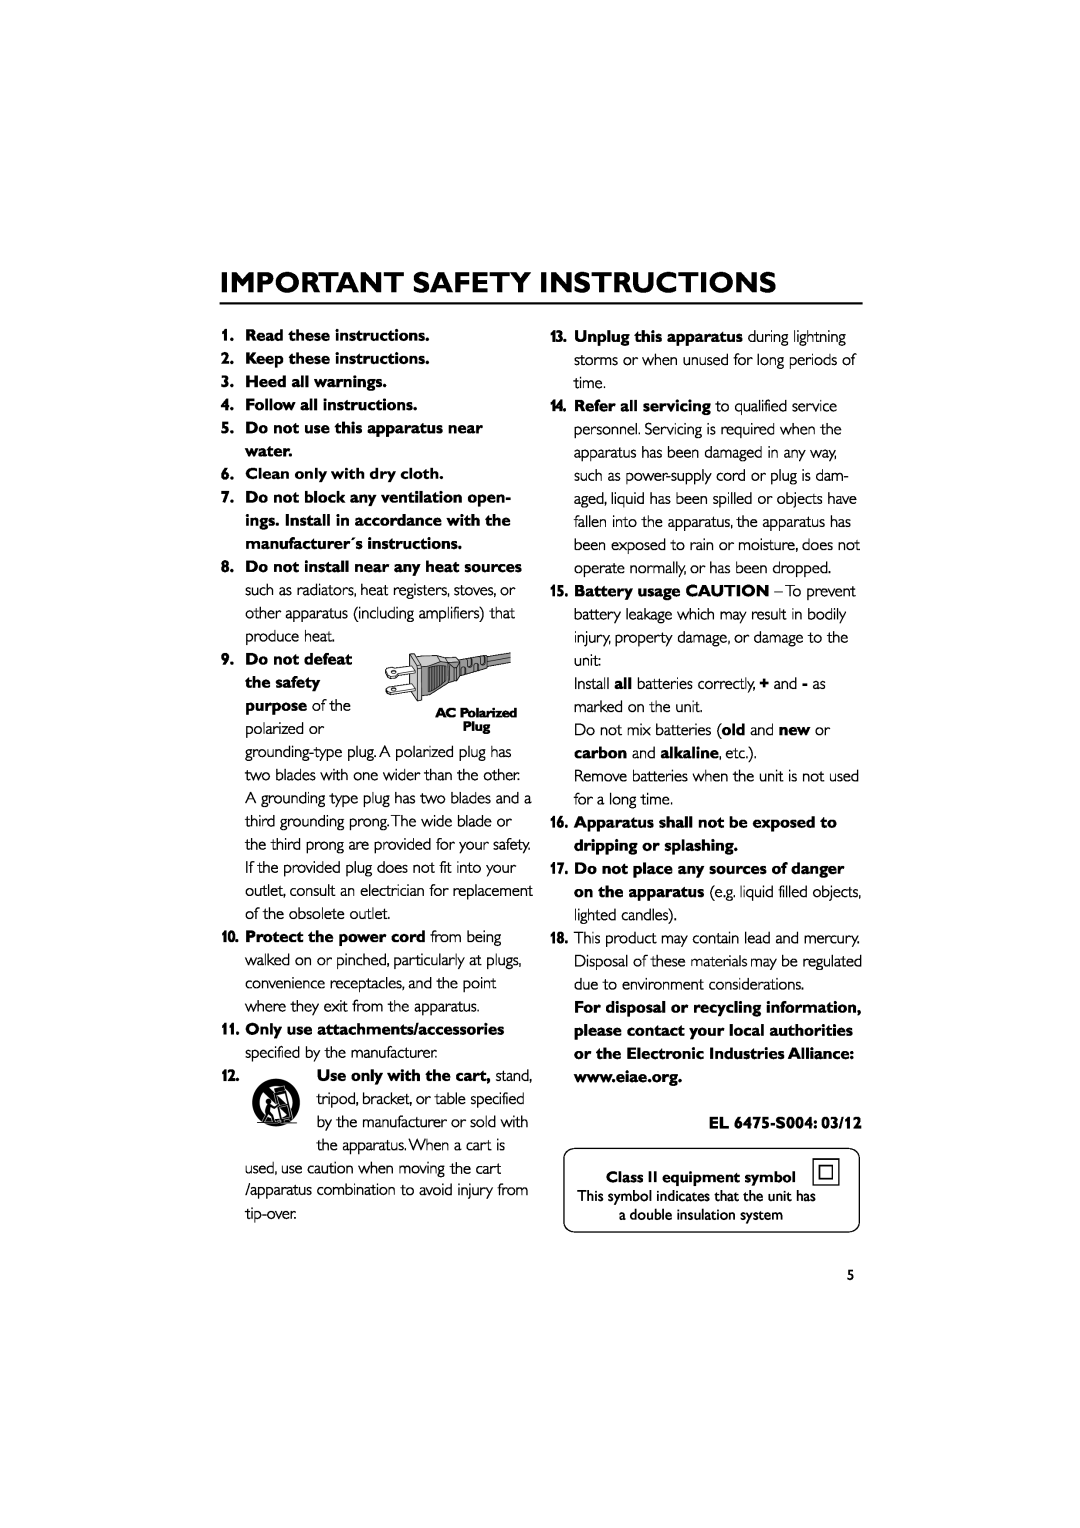 Philips MCD702, MCD700 manual Important Safety Instructions, Clean only with dry cloth 